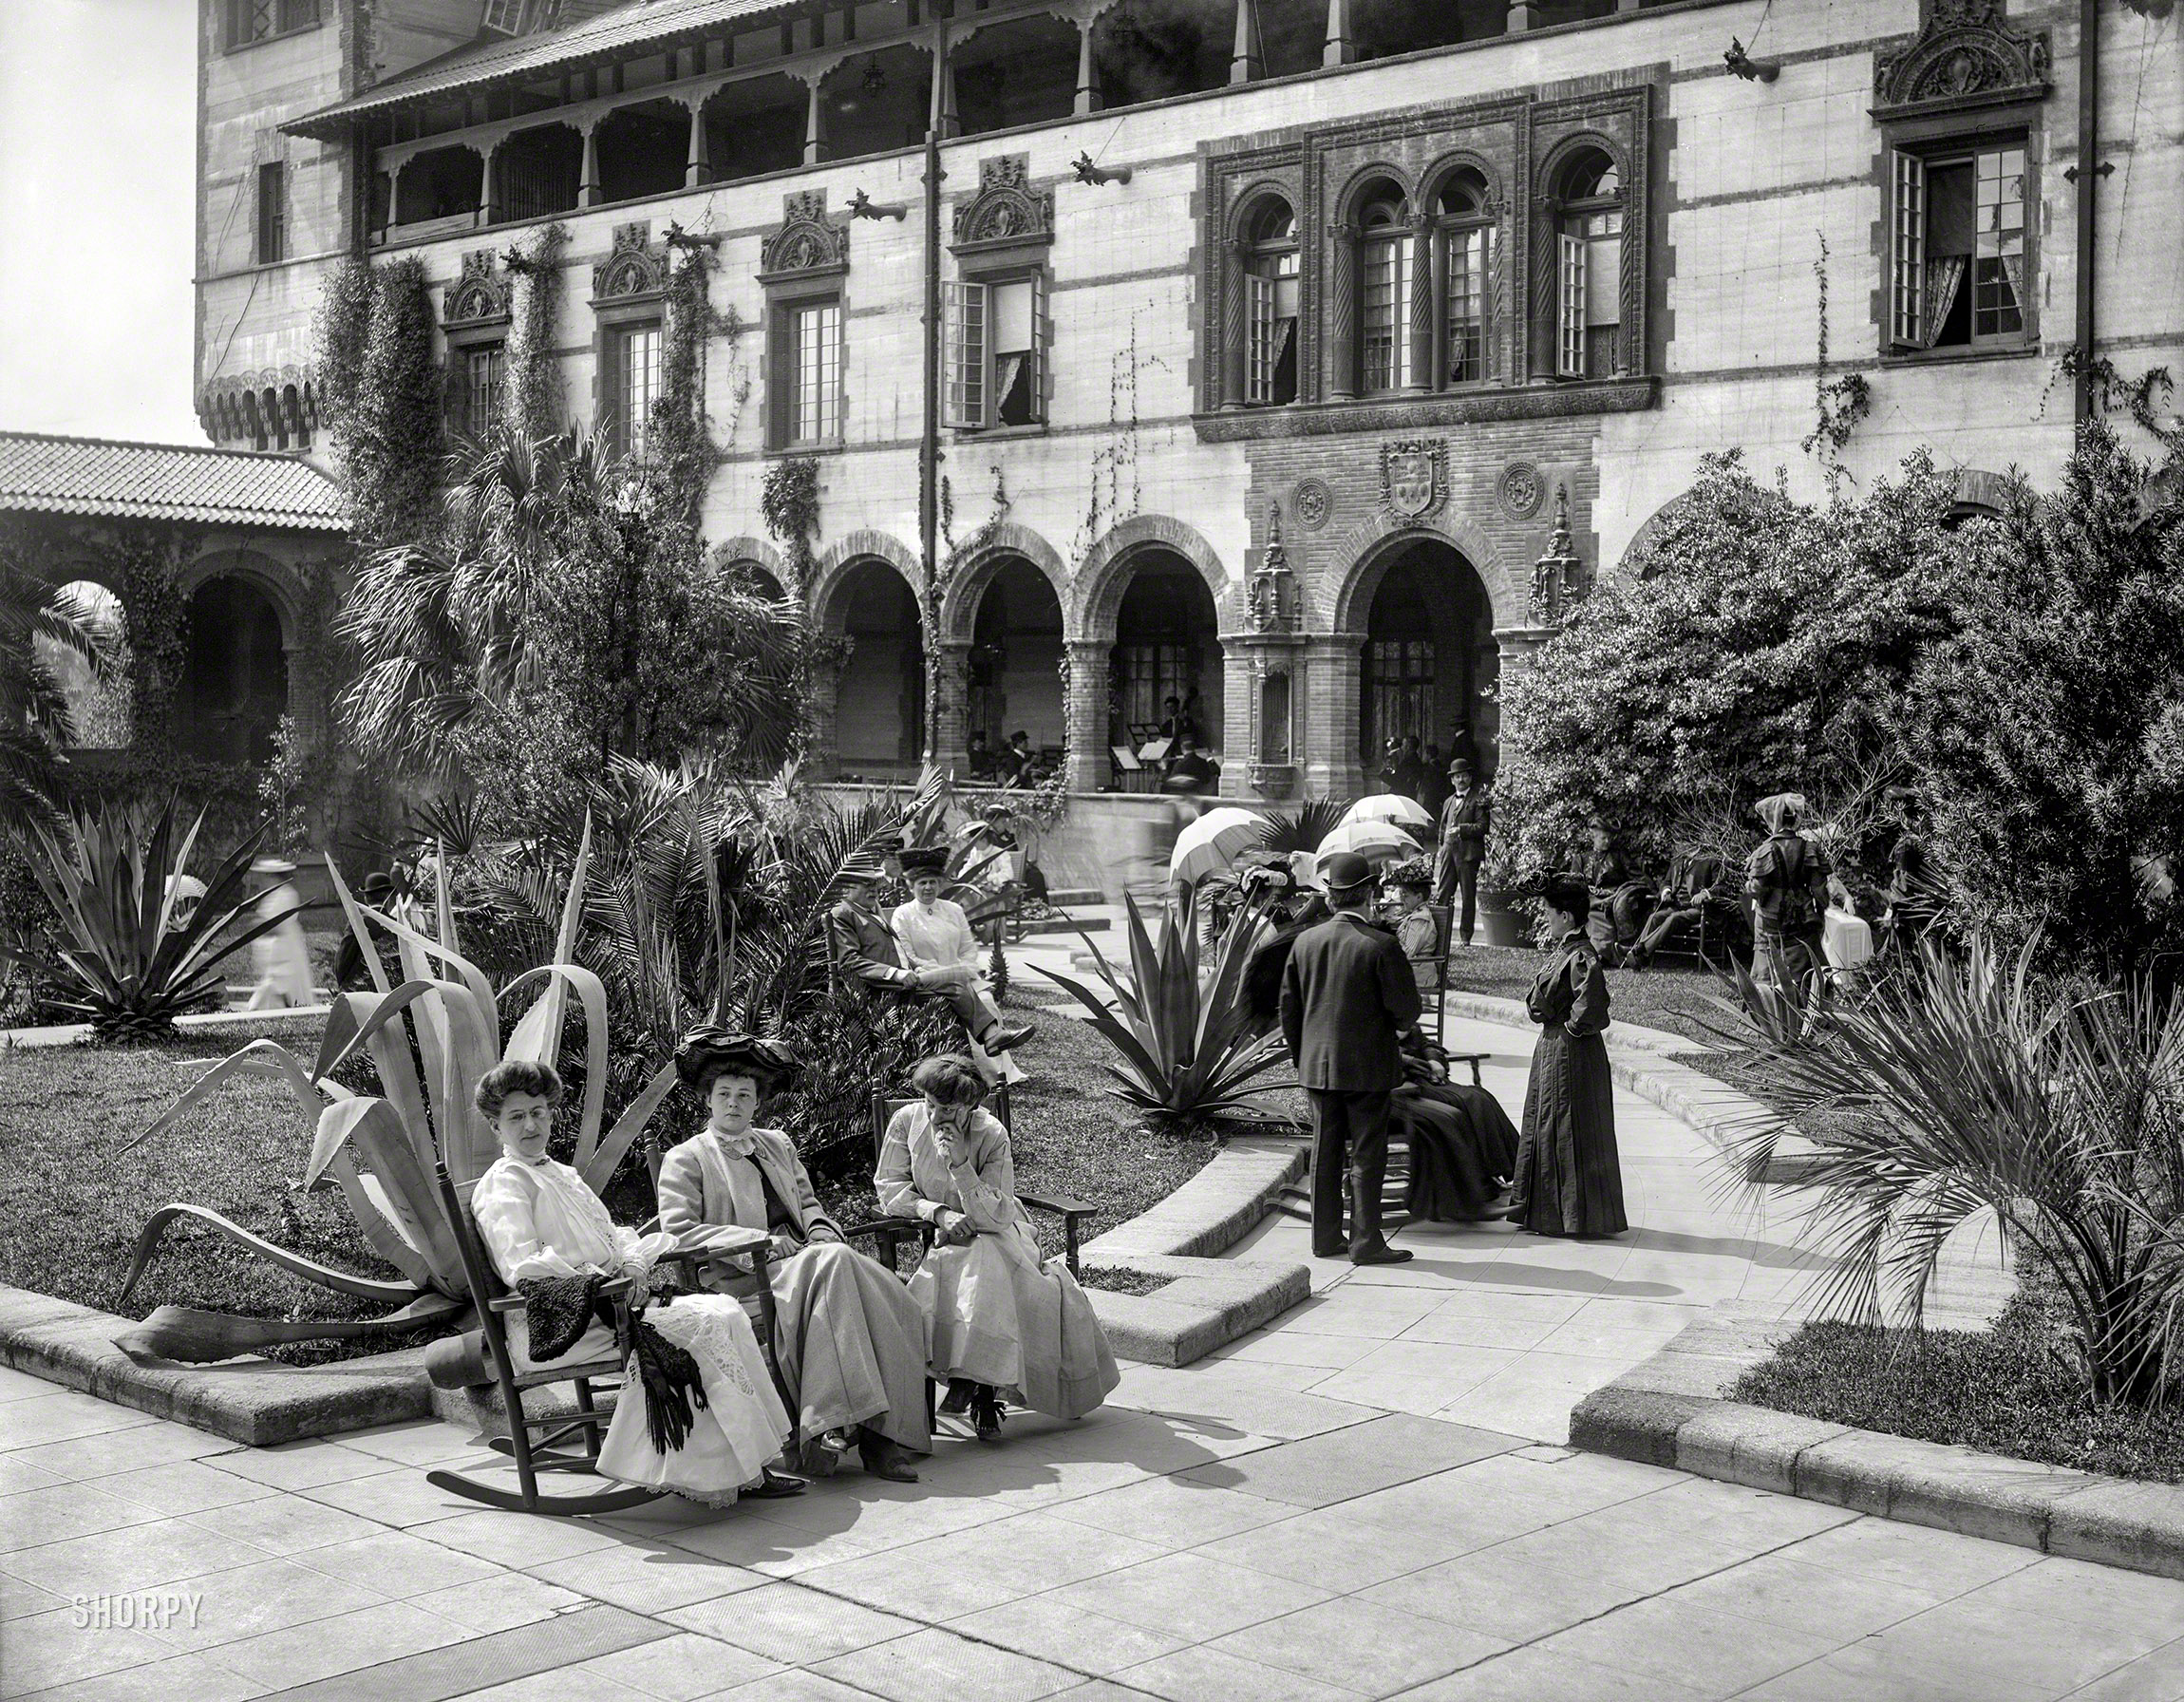 St. Augustine, Florida, circa 1905. "In the court of the Hotel Ponce de Leon." 8x10 inch dry plate glass negative, Detroit Publishing Company. View full size.